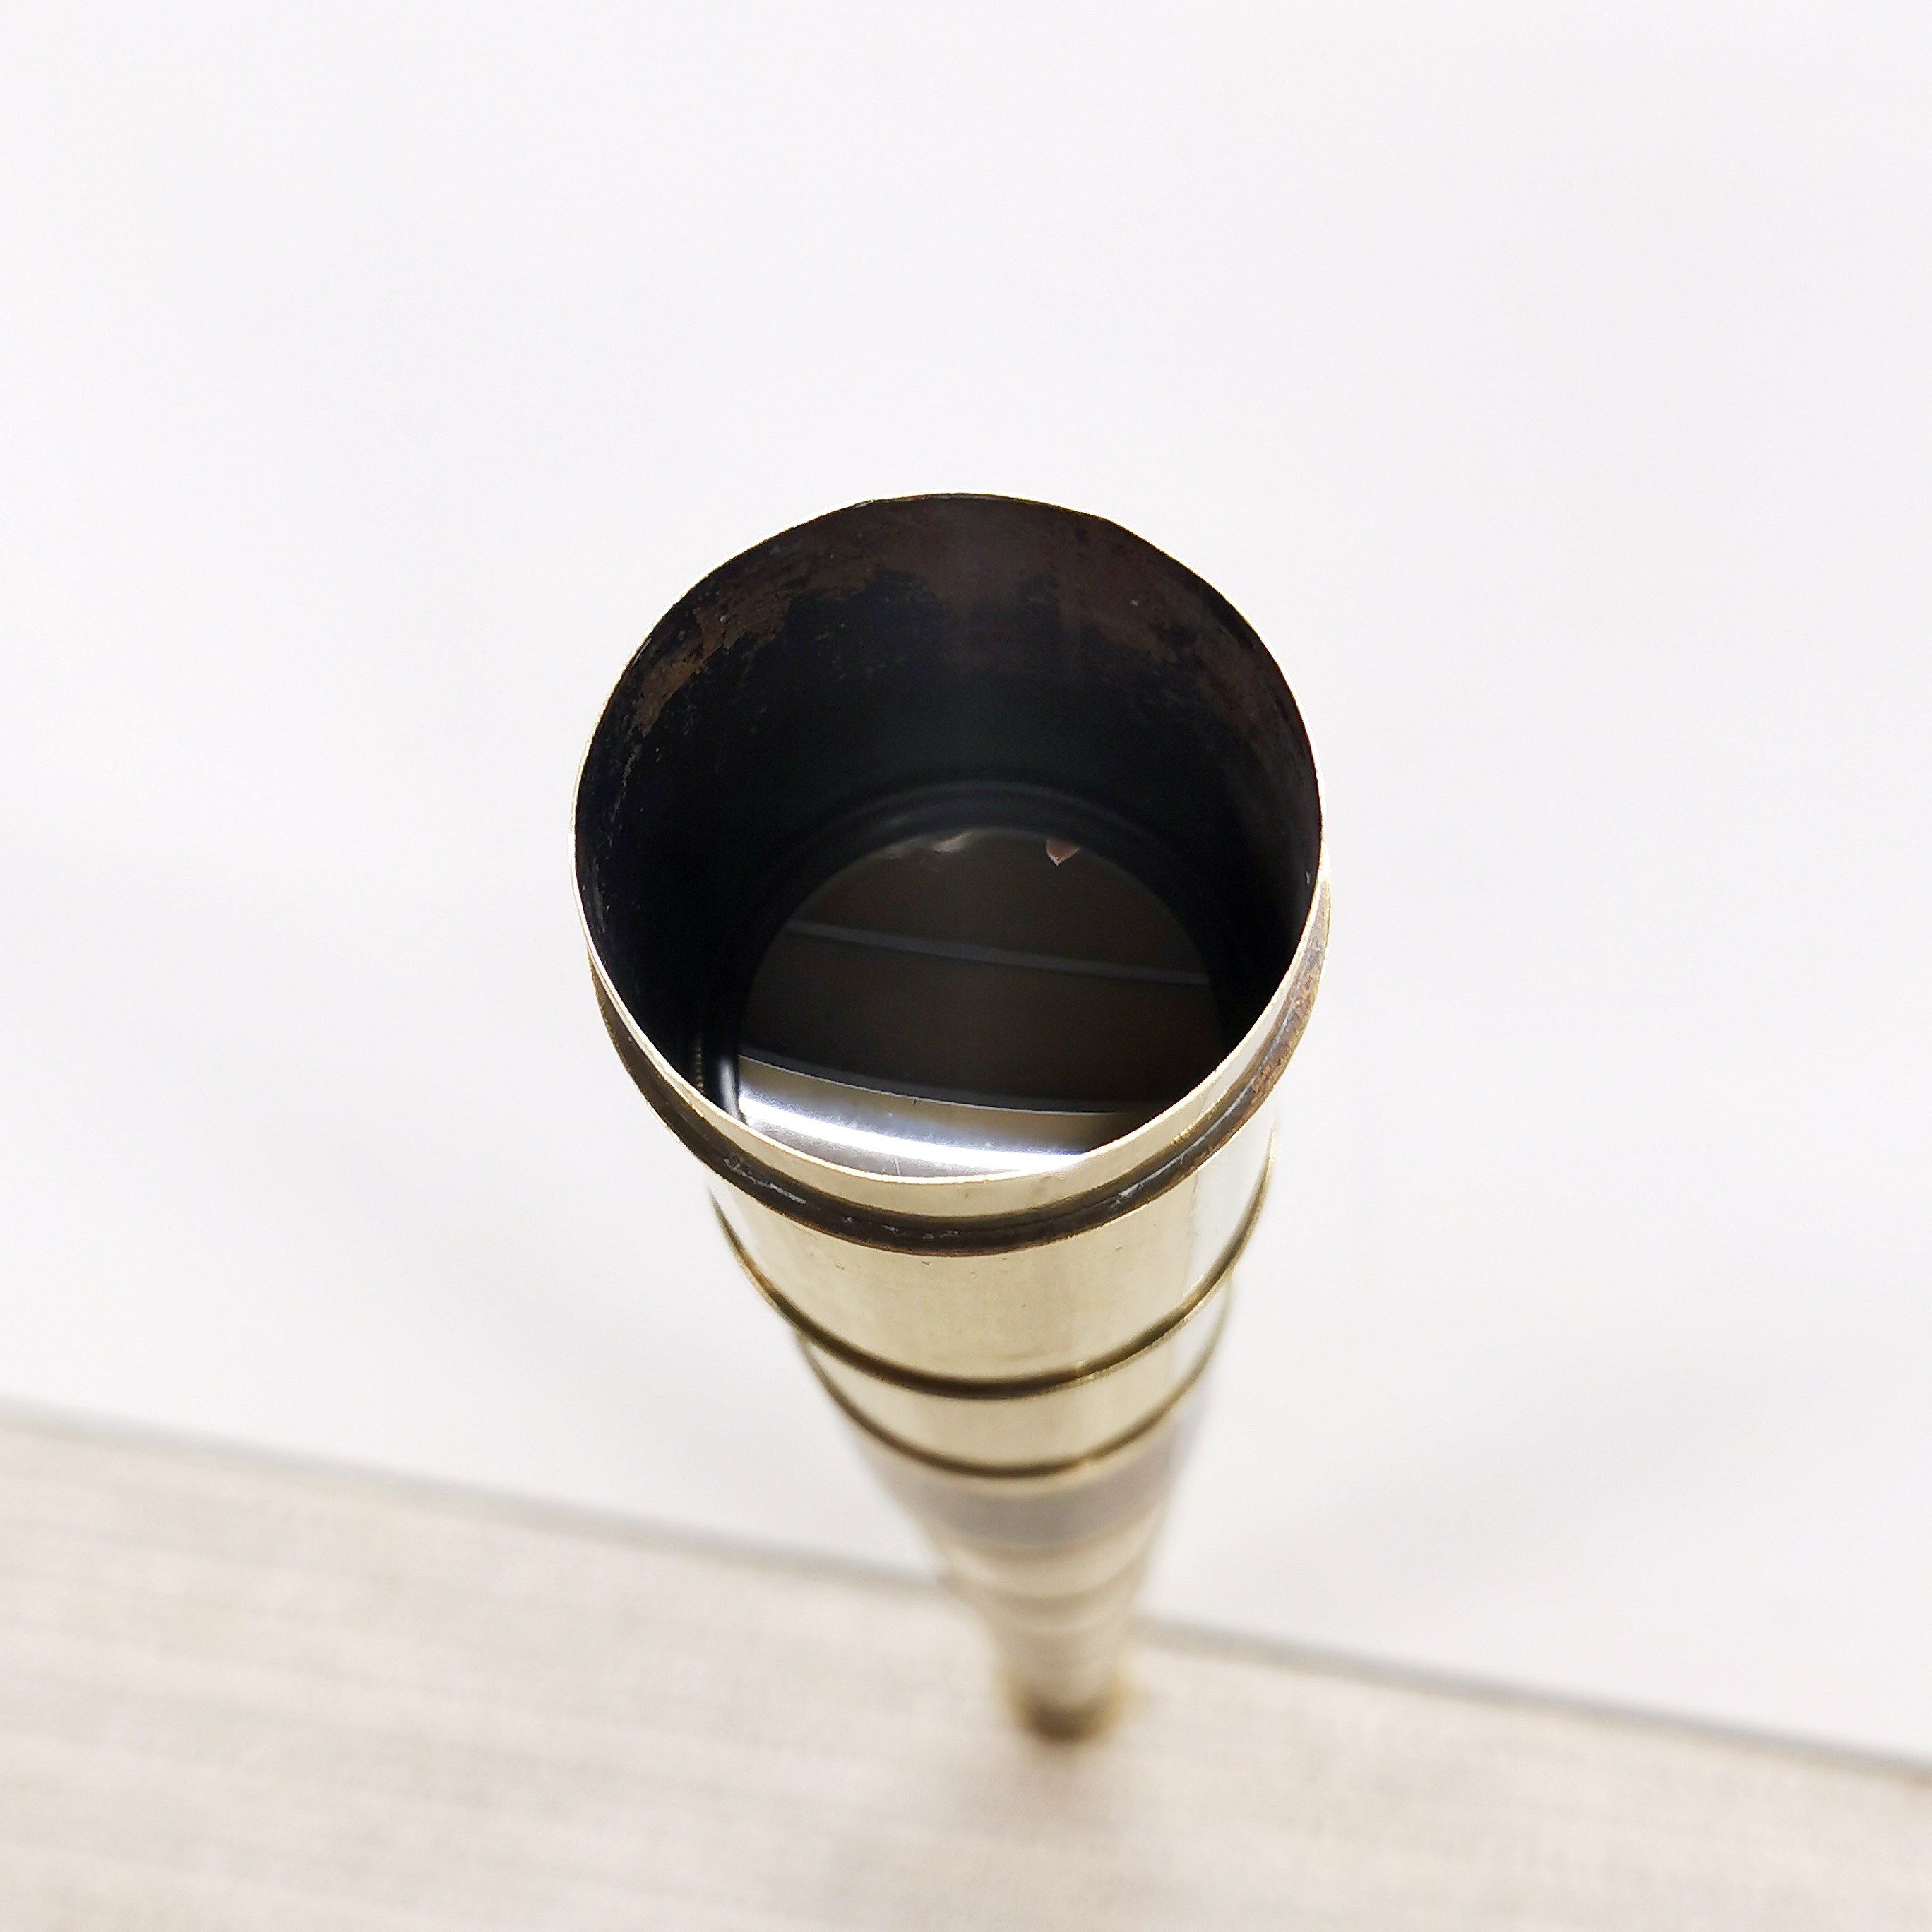 An old brass telescope, closed L. 18cm, Open L. 57cm. - Image 2 of 5